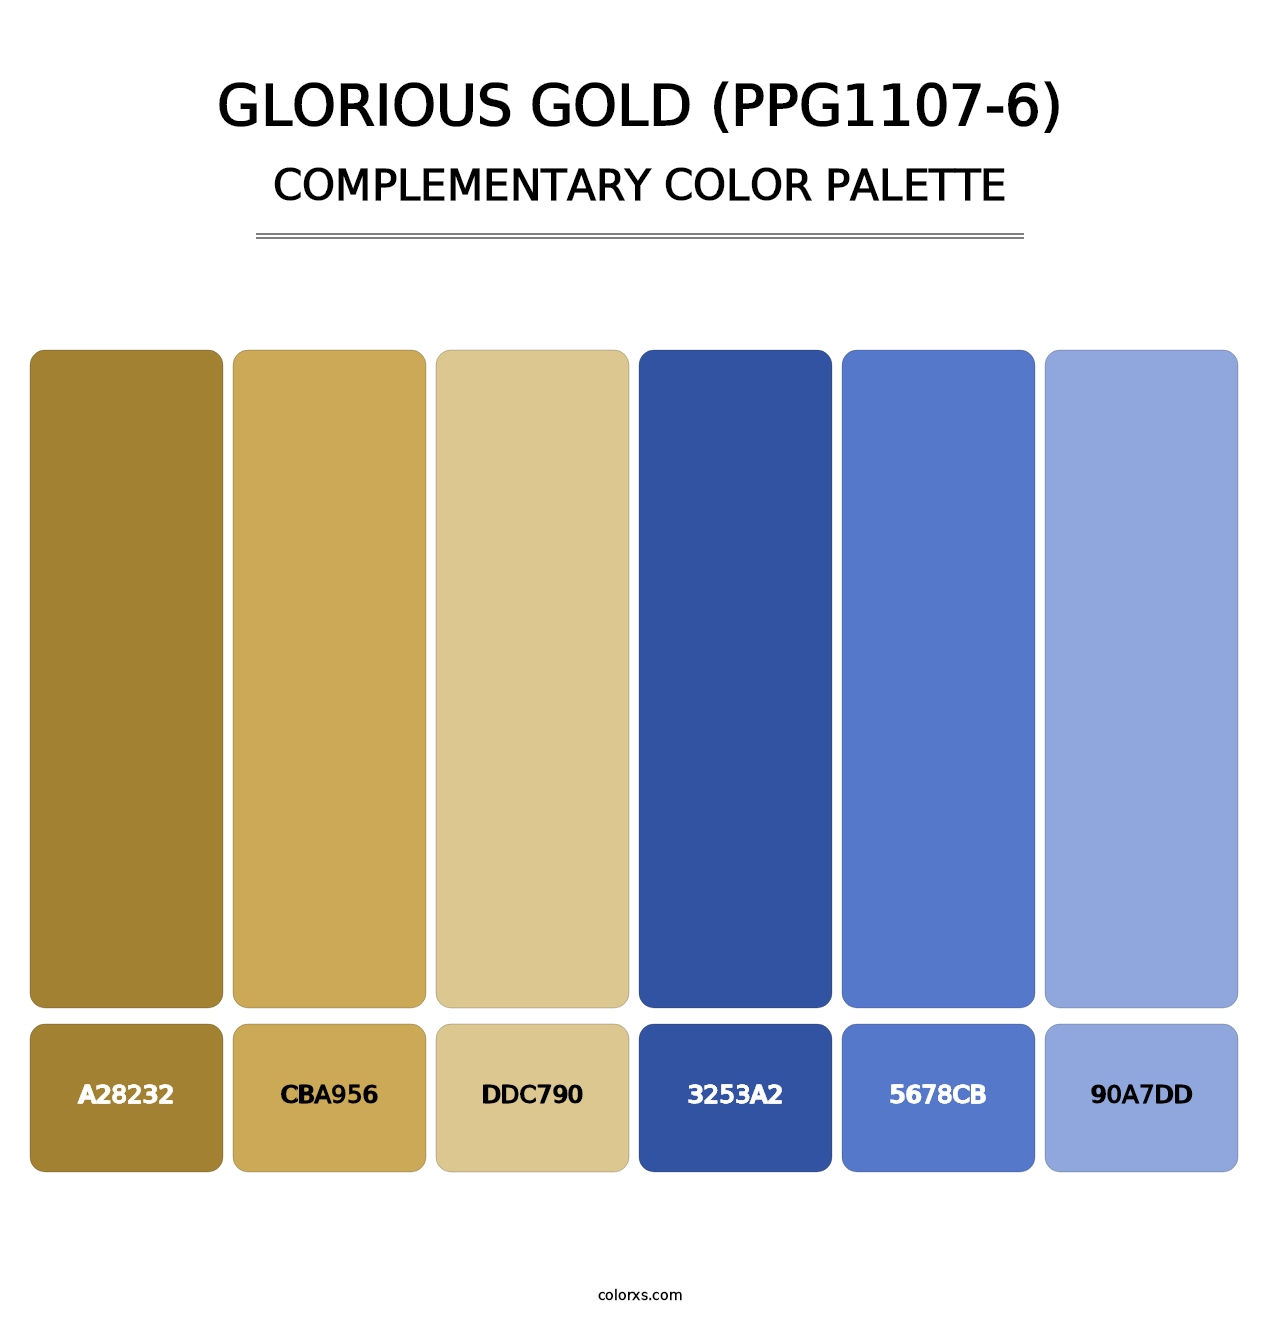 Glorious Gold (PPG1107-6) - Complementary Color Palette